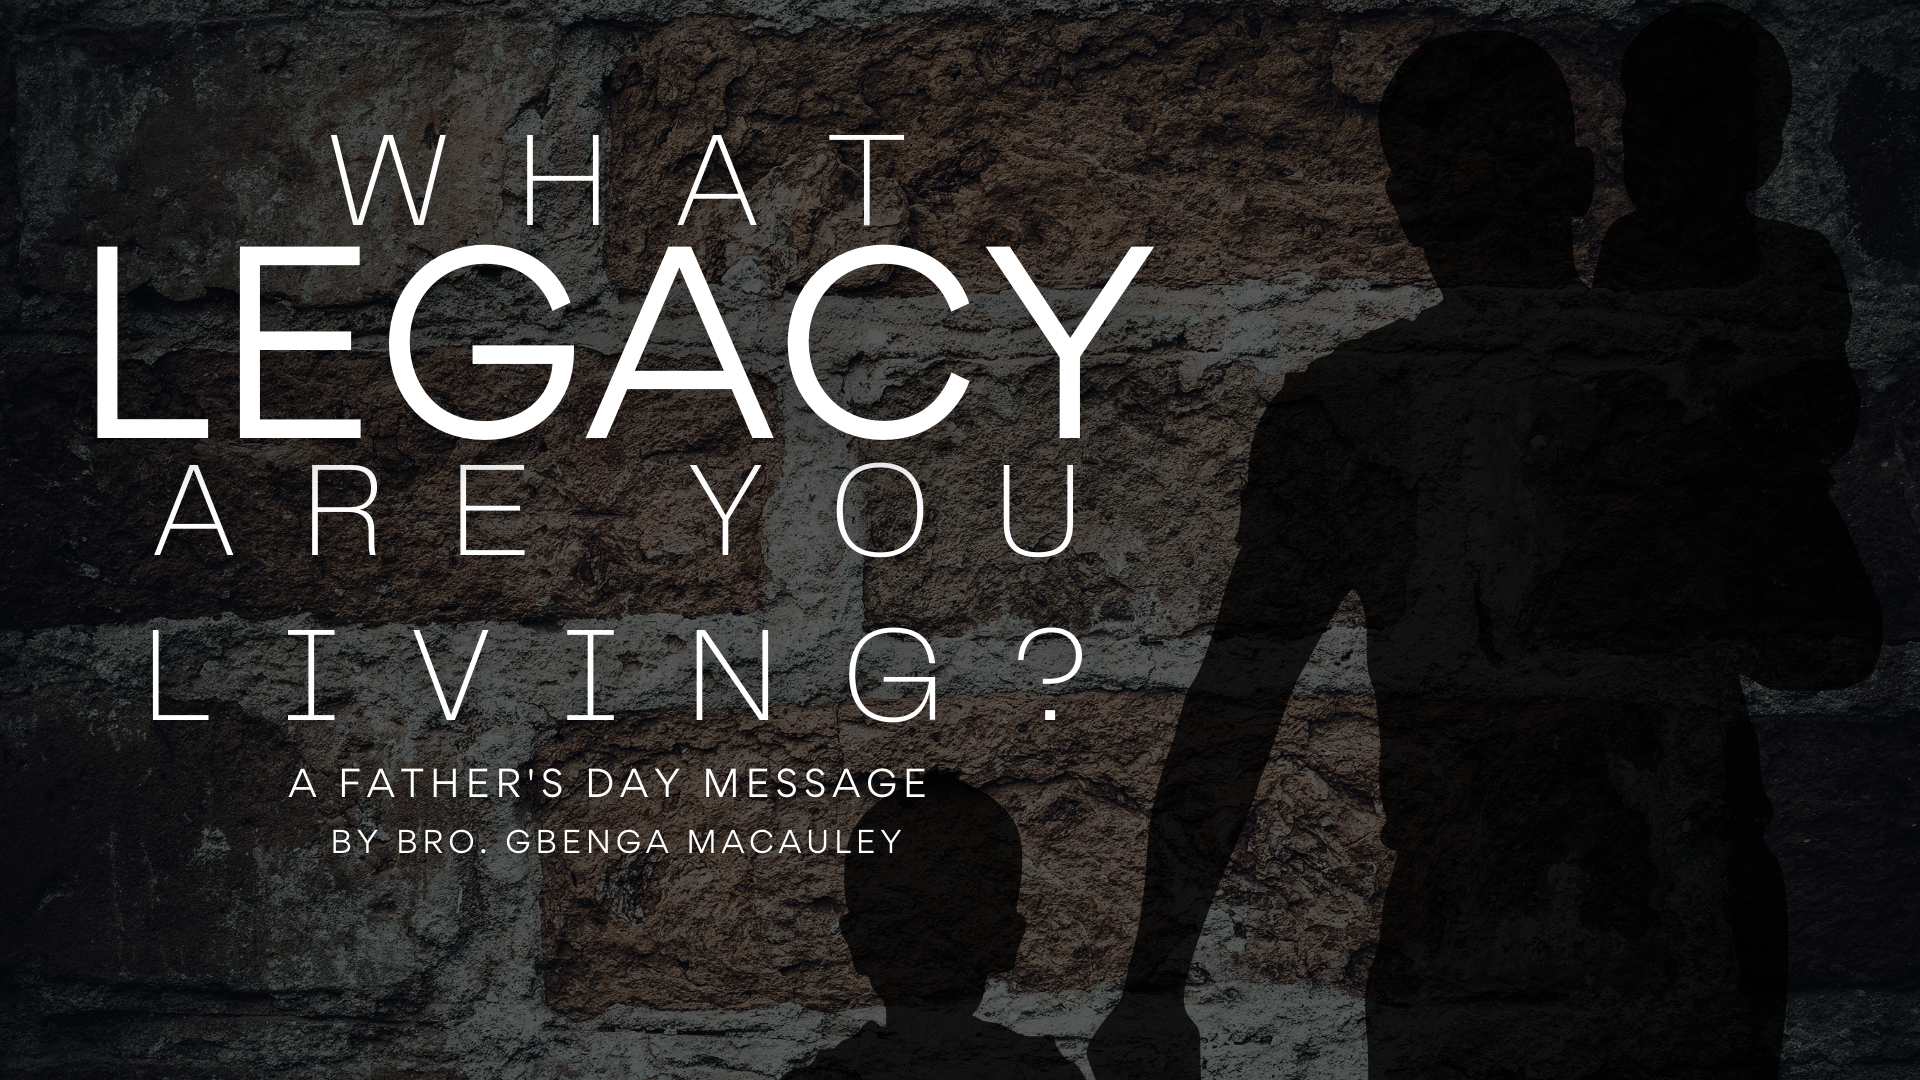 What Legacy Are You Living?